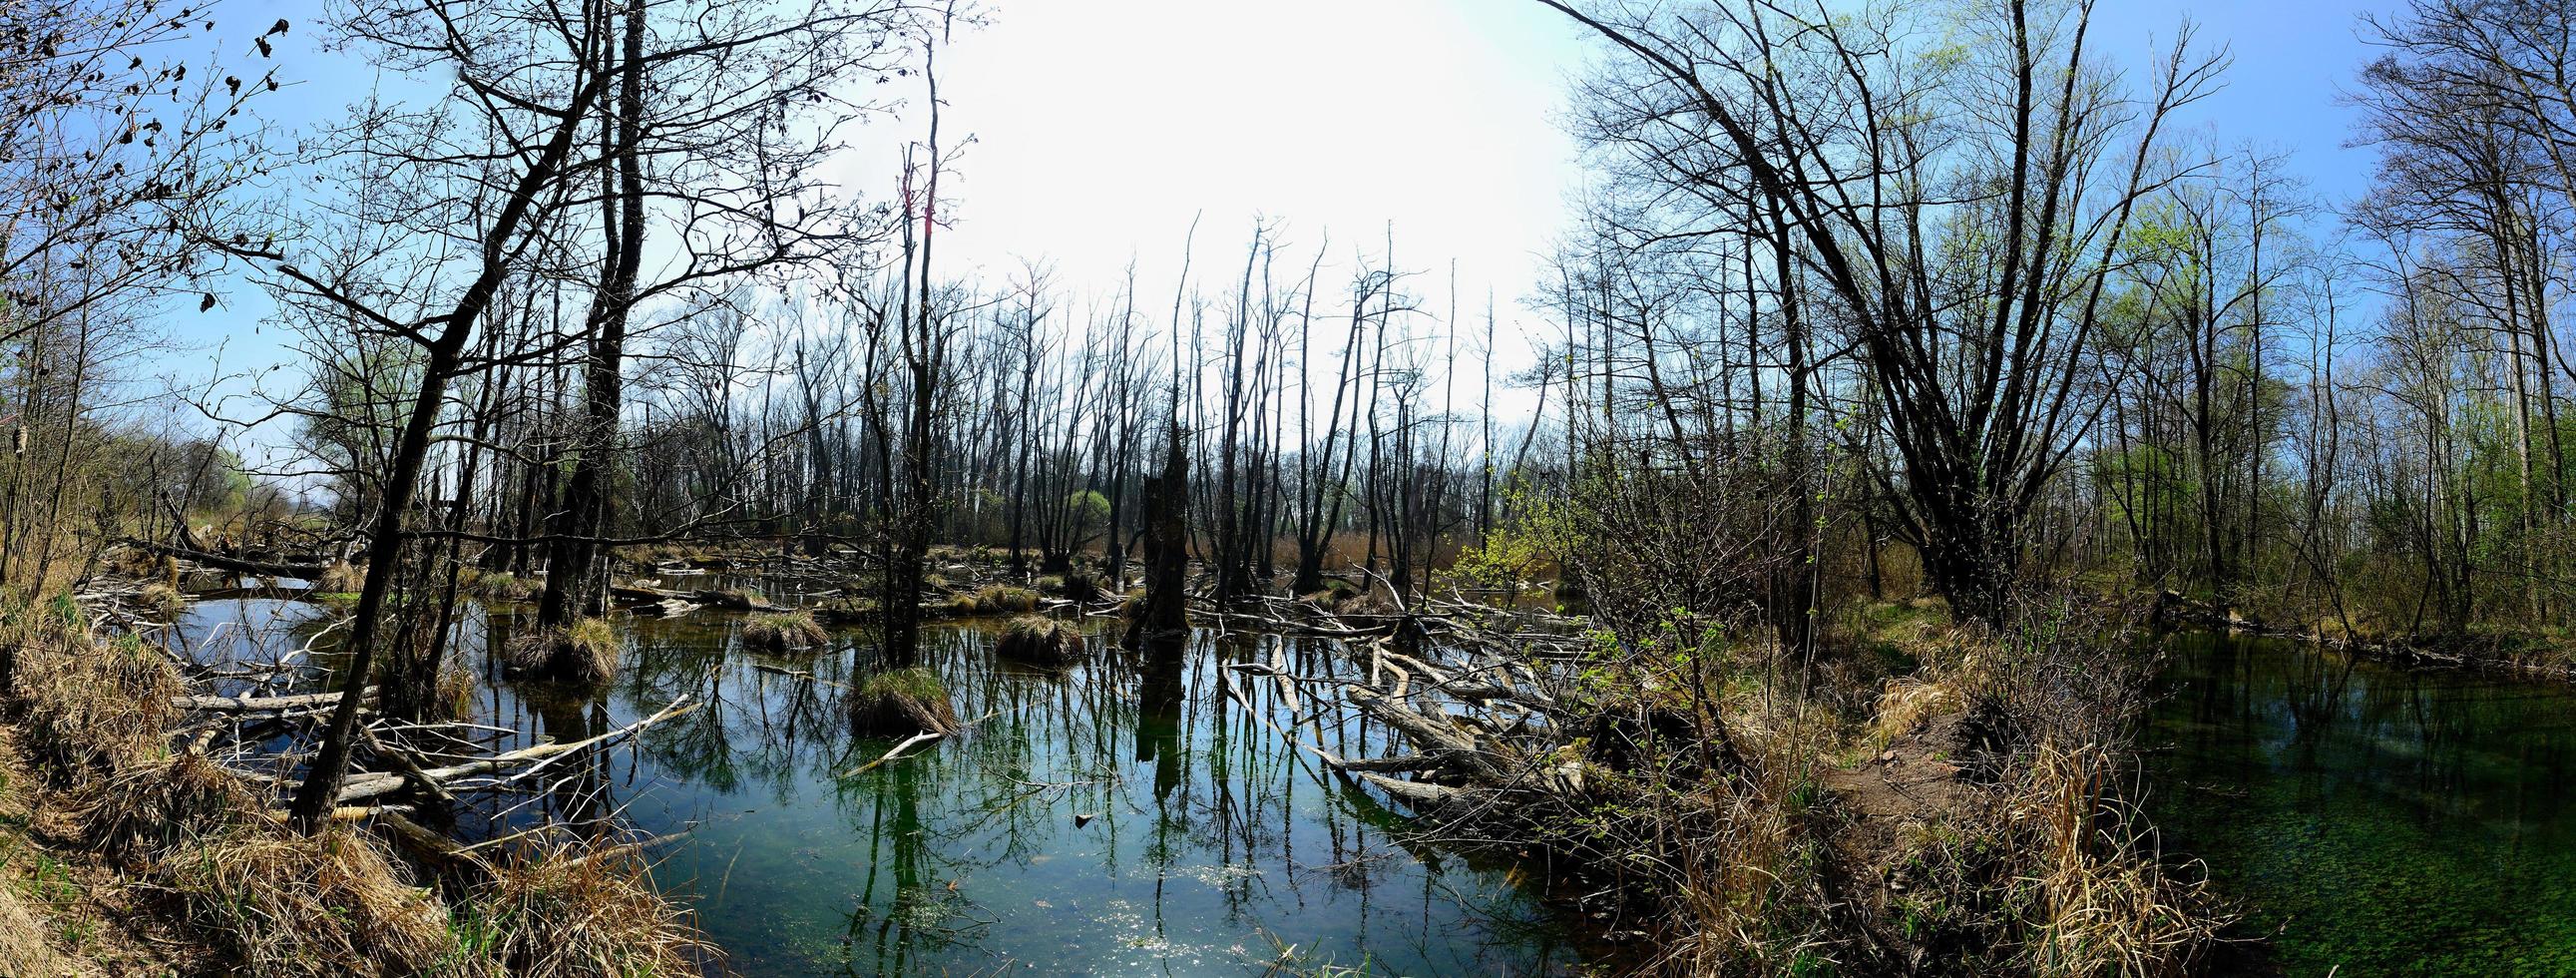 nature landscape with swamp panorama photo